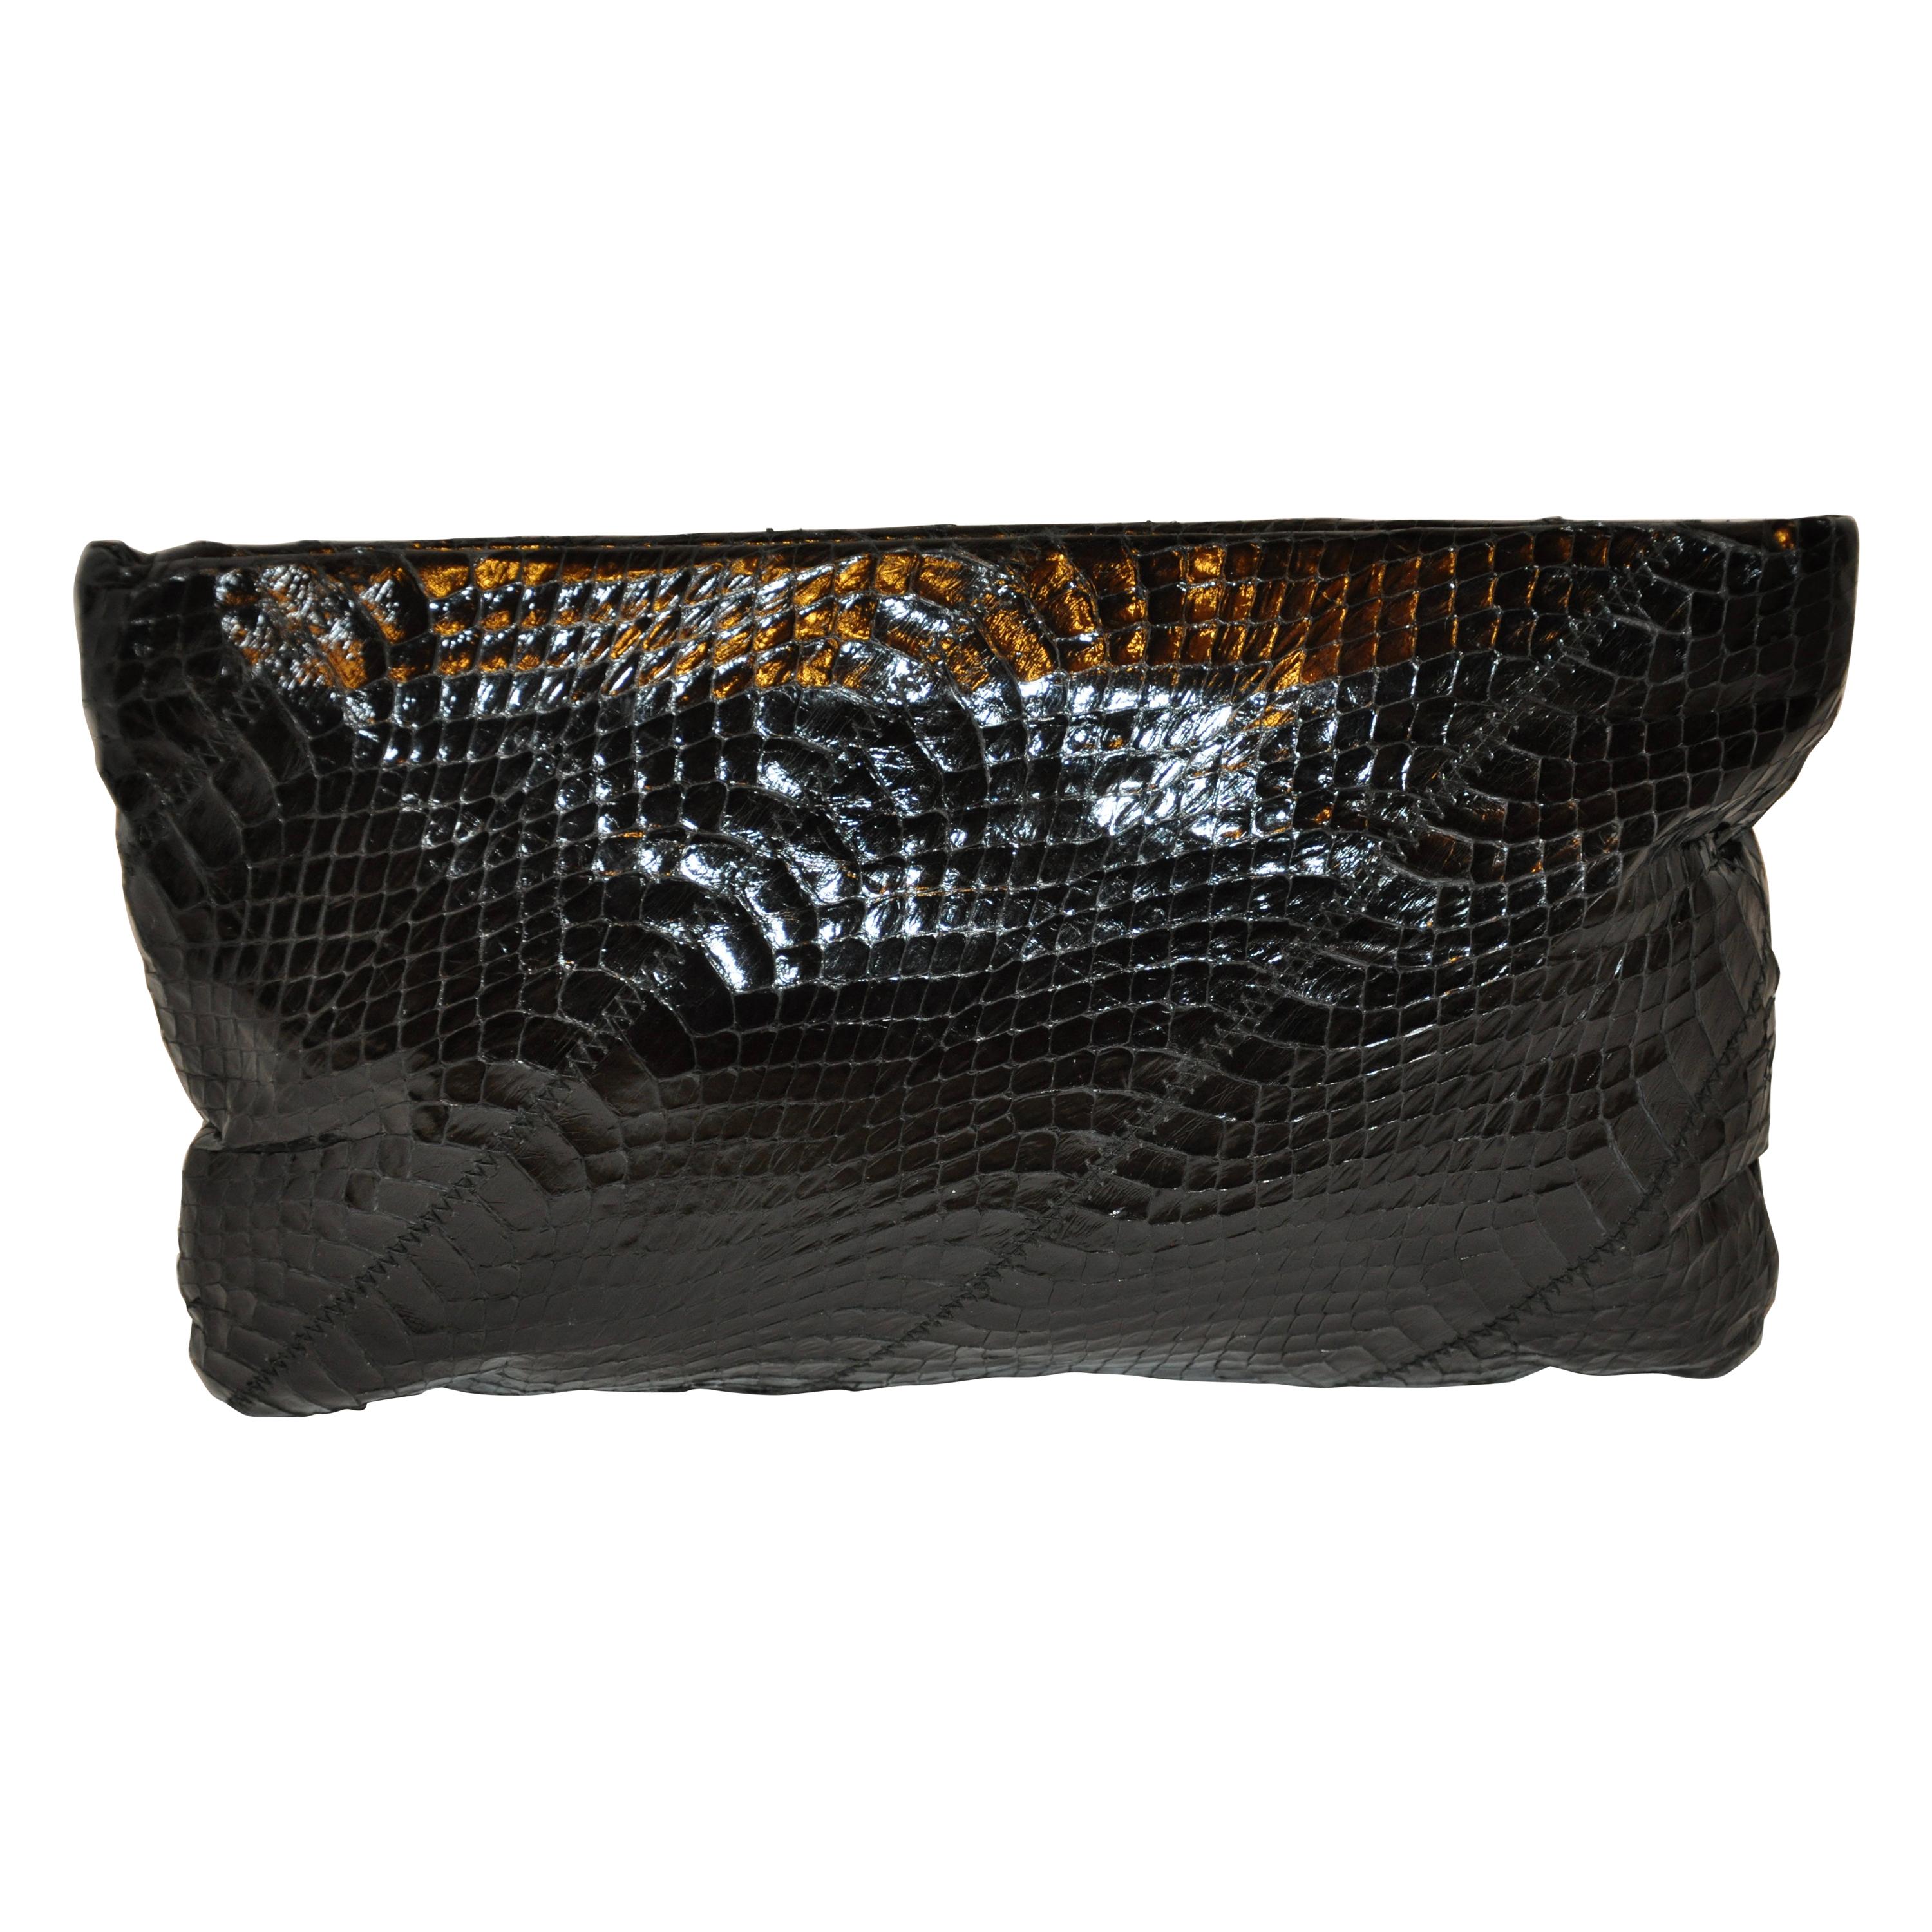 Ronay Midnight-Black Snakeskin "Spring-Top" Clutch With Optional Shoulder Strap.